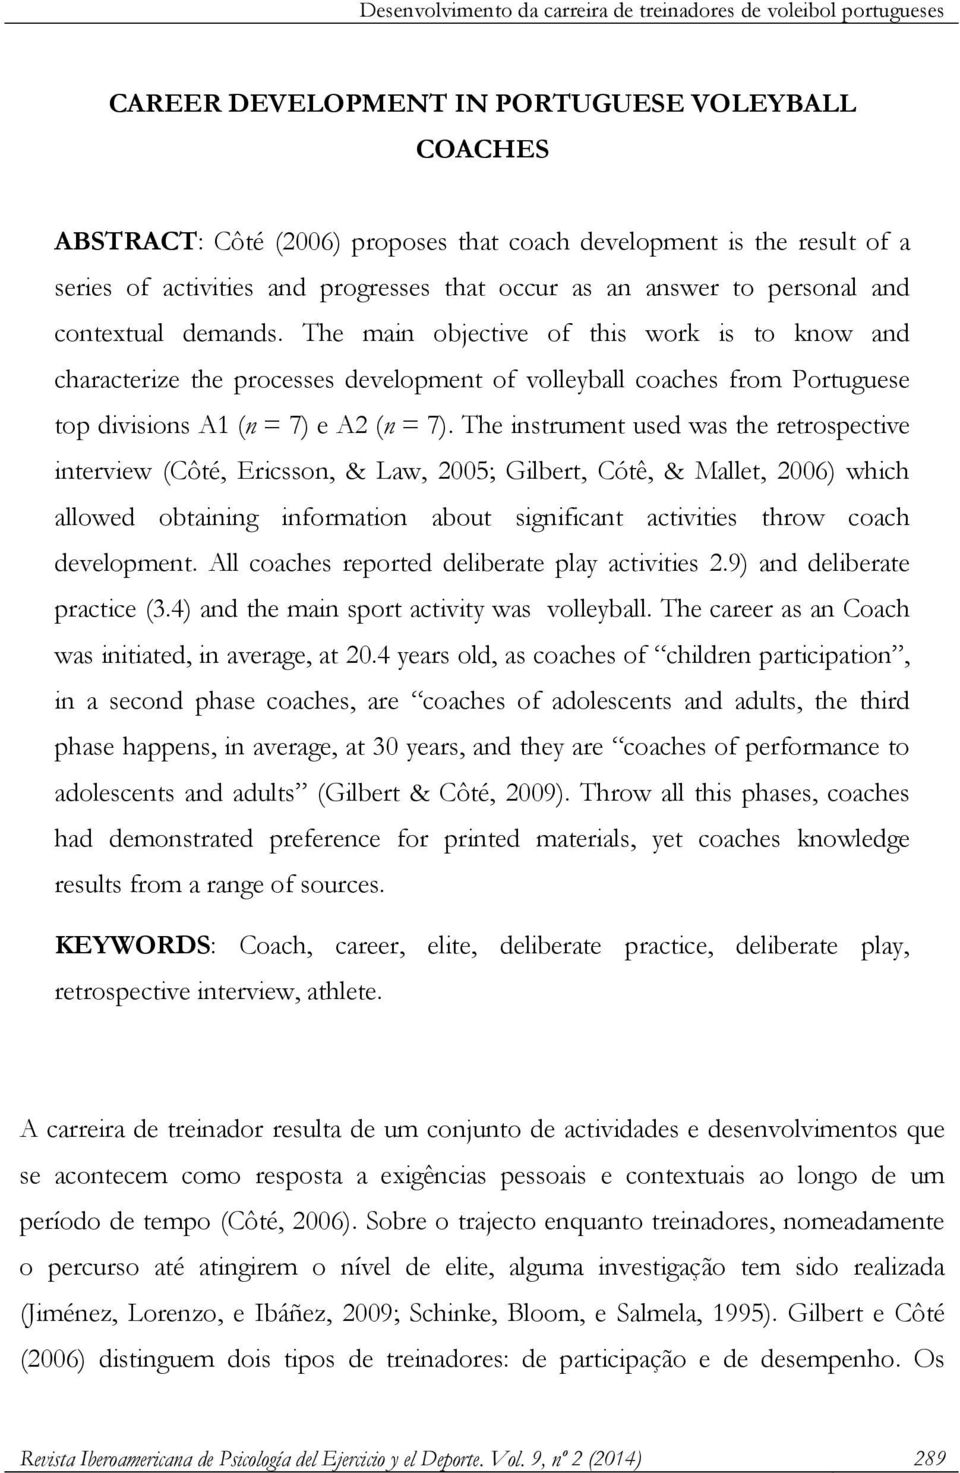 The main objective of this work is to know and characterize the processes development of volleyball coaches from Portuguese top divisions A1 (n = 7) e A2 (n = 7).